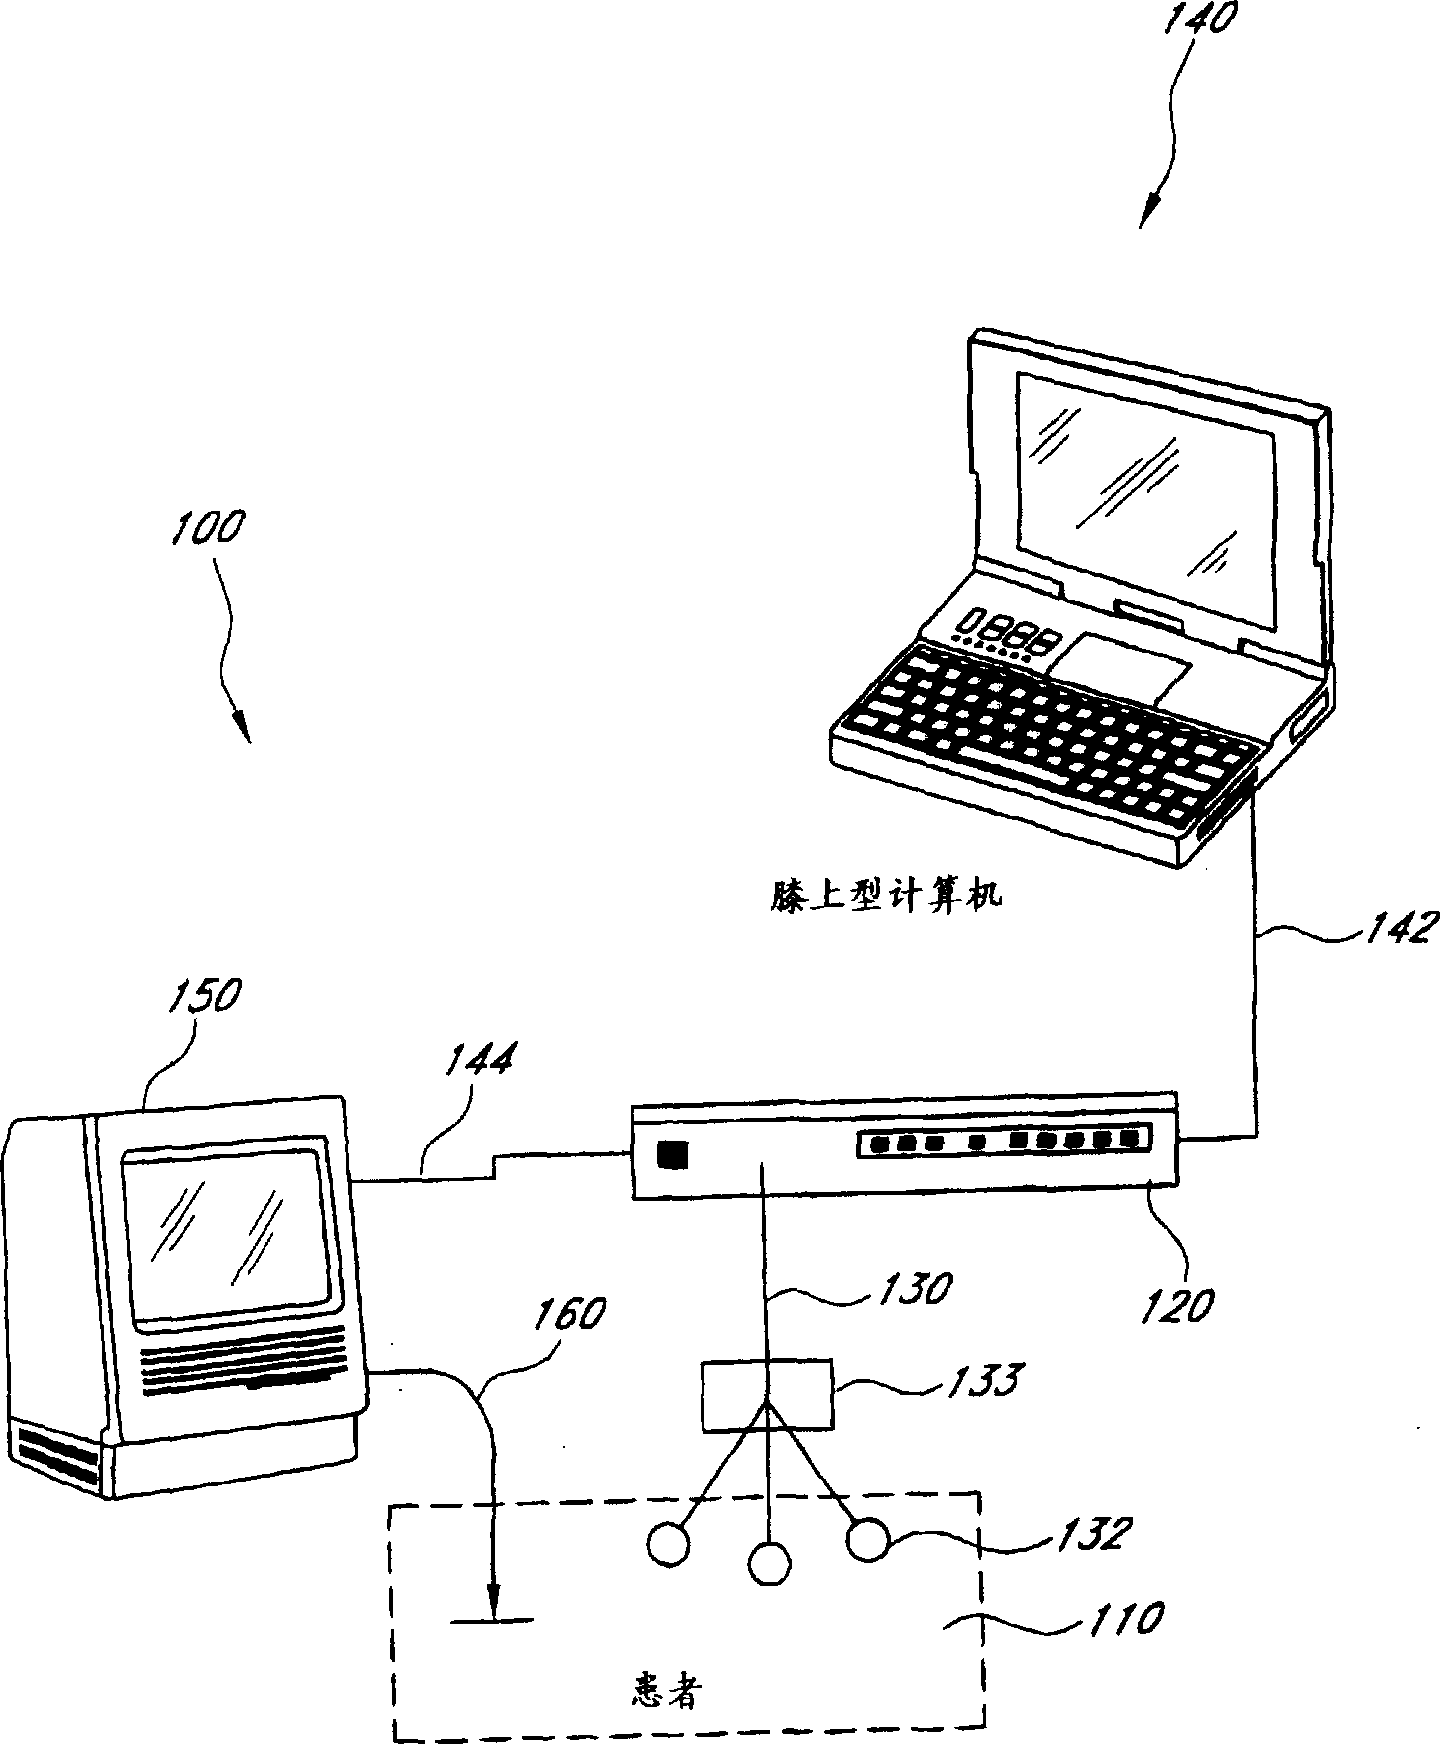 System and method for measuring oxygenation parameters